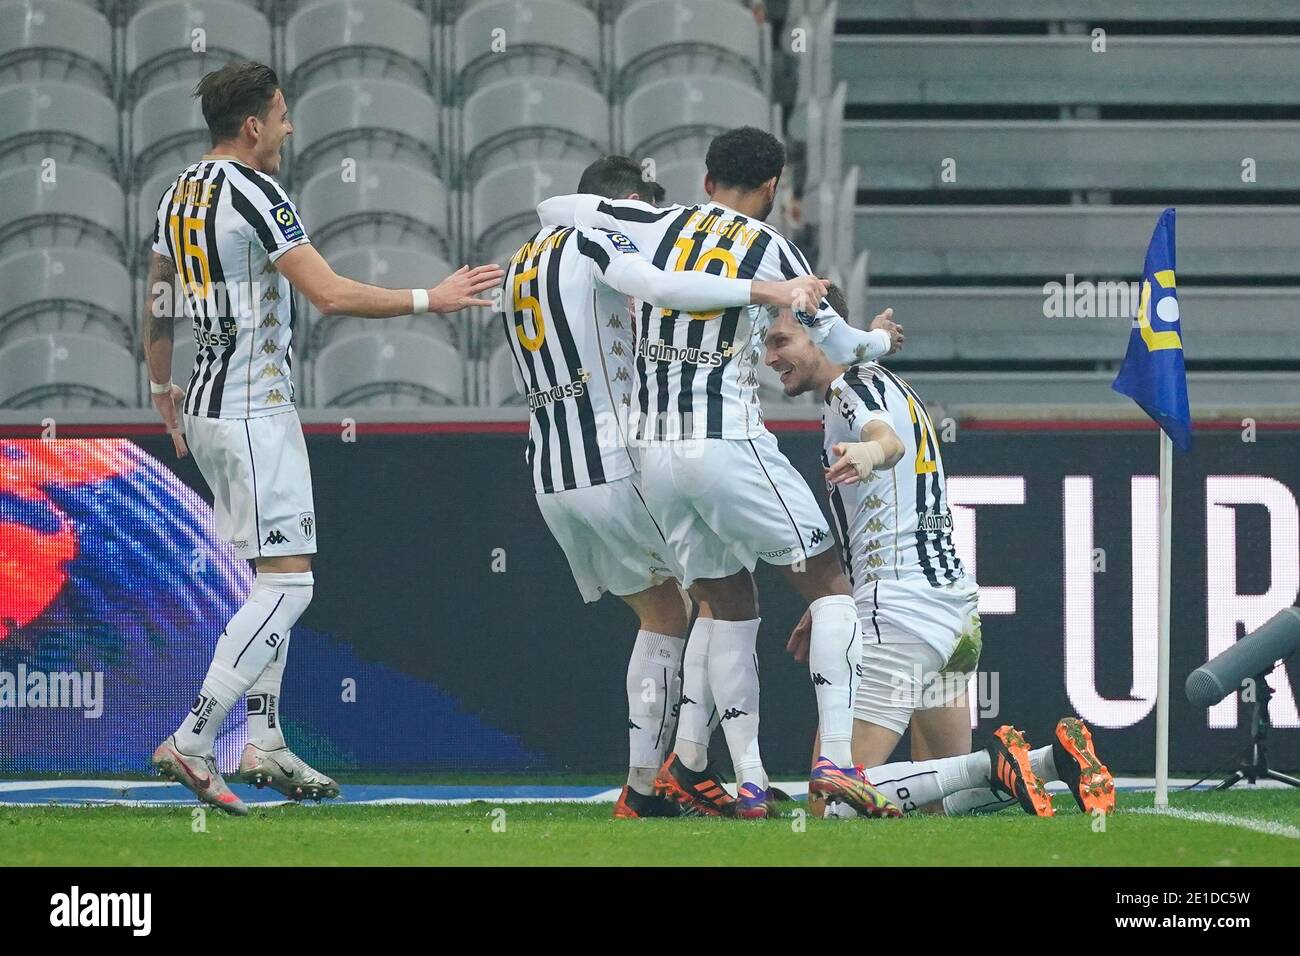 LILLE, FRANCE - JANUARY 6: Romain Thomas of Angers SCO celebrating his second goal during the Ligue 1 match between Lille OSC and Angers SCO at Stade Pierre Mauroy on January 6, 2021 in Lille, France (Photo by Jeroen Meuwsen/BSR Agency/Alamy Live News)*** Local Caption *** Romain Thomas Stock Photo